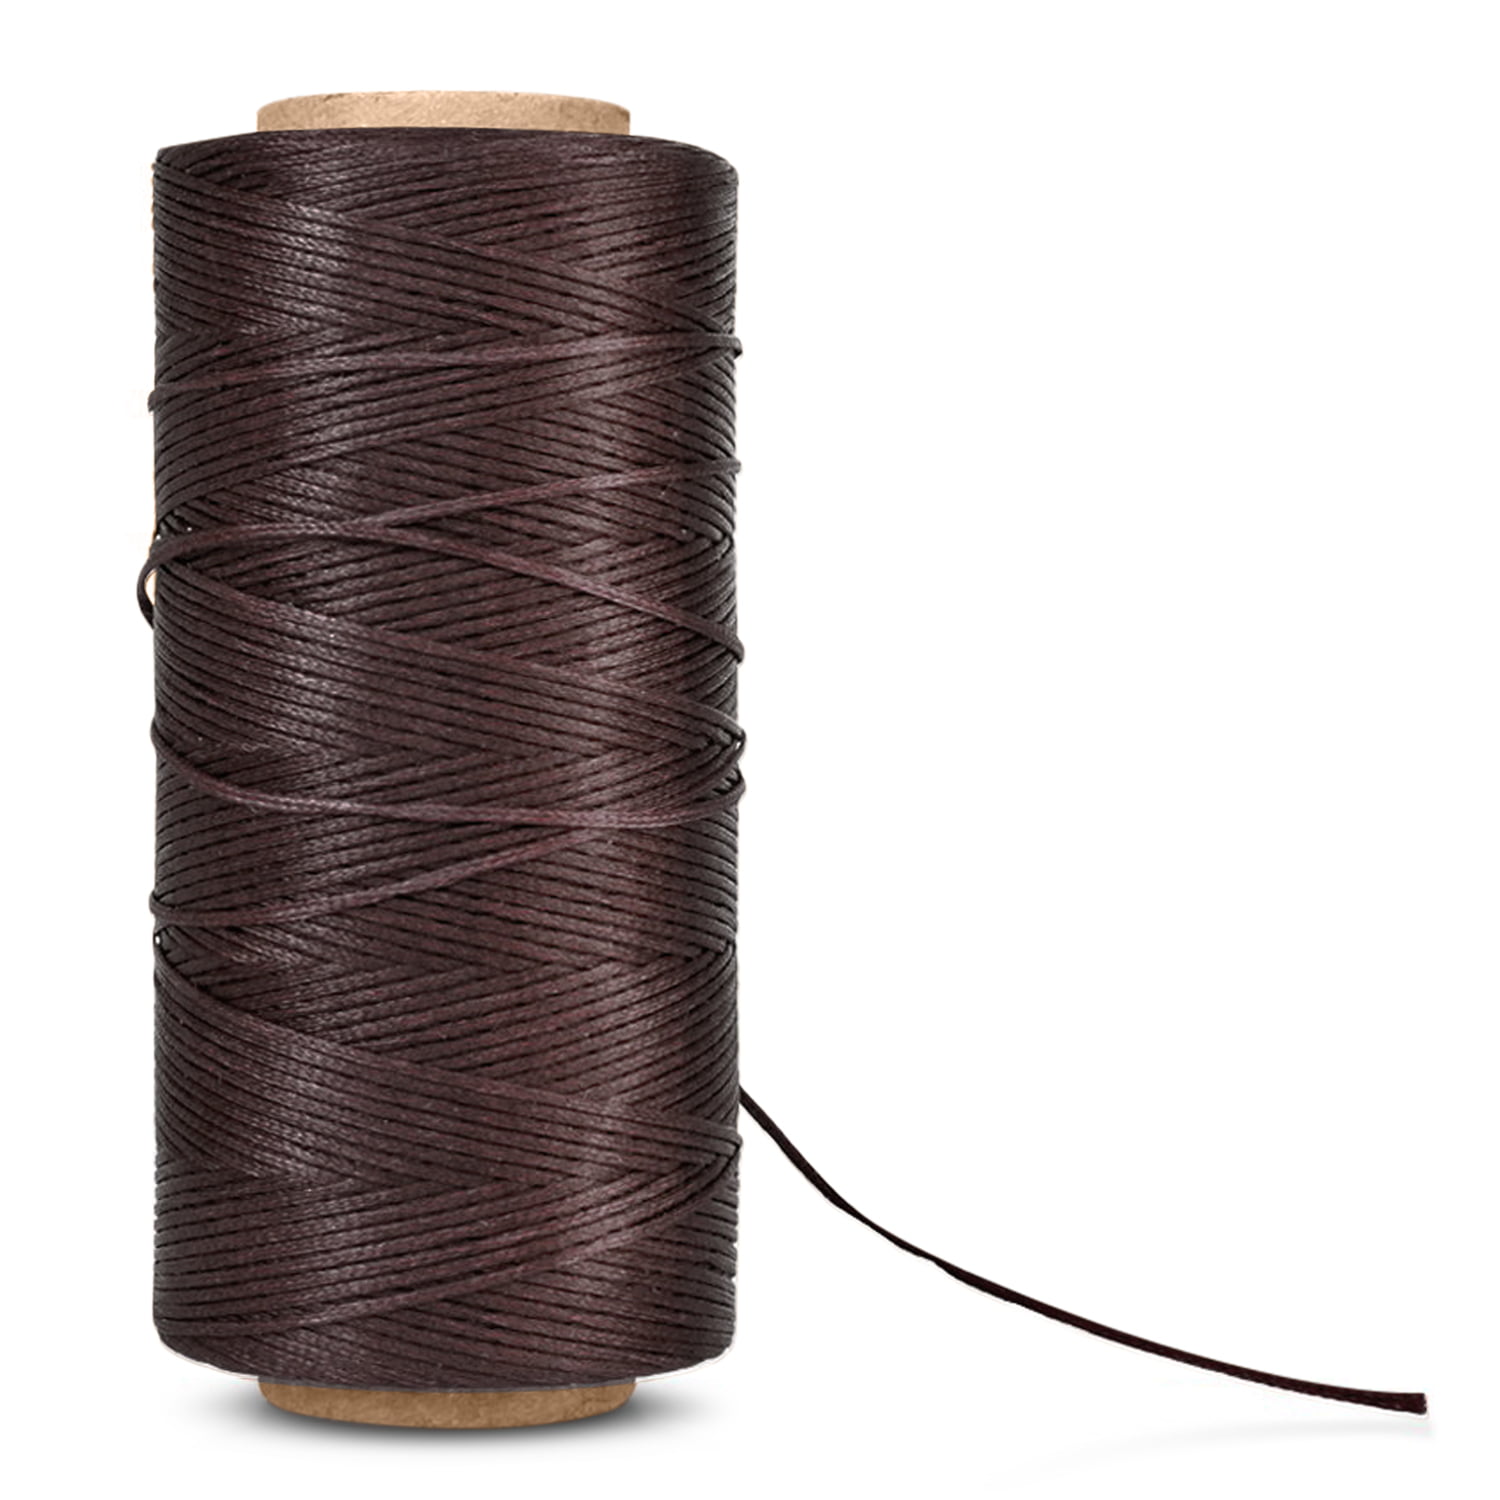 Flat Waxed Thread for Leather Sewing - Leather Thread Wax String Polyester Cord for Leather Craft Stitching Bookbinding by Mandala Crafts 210D 1mm